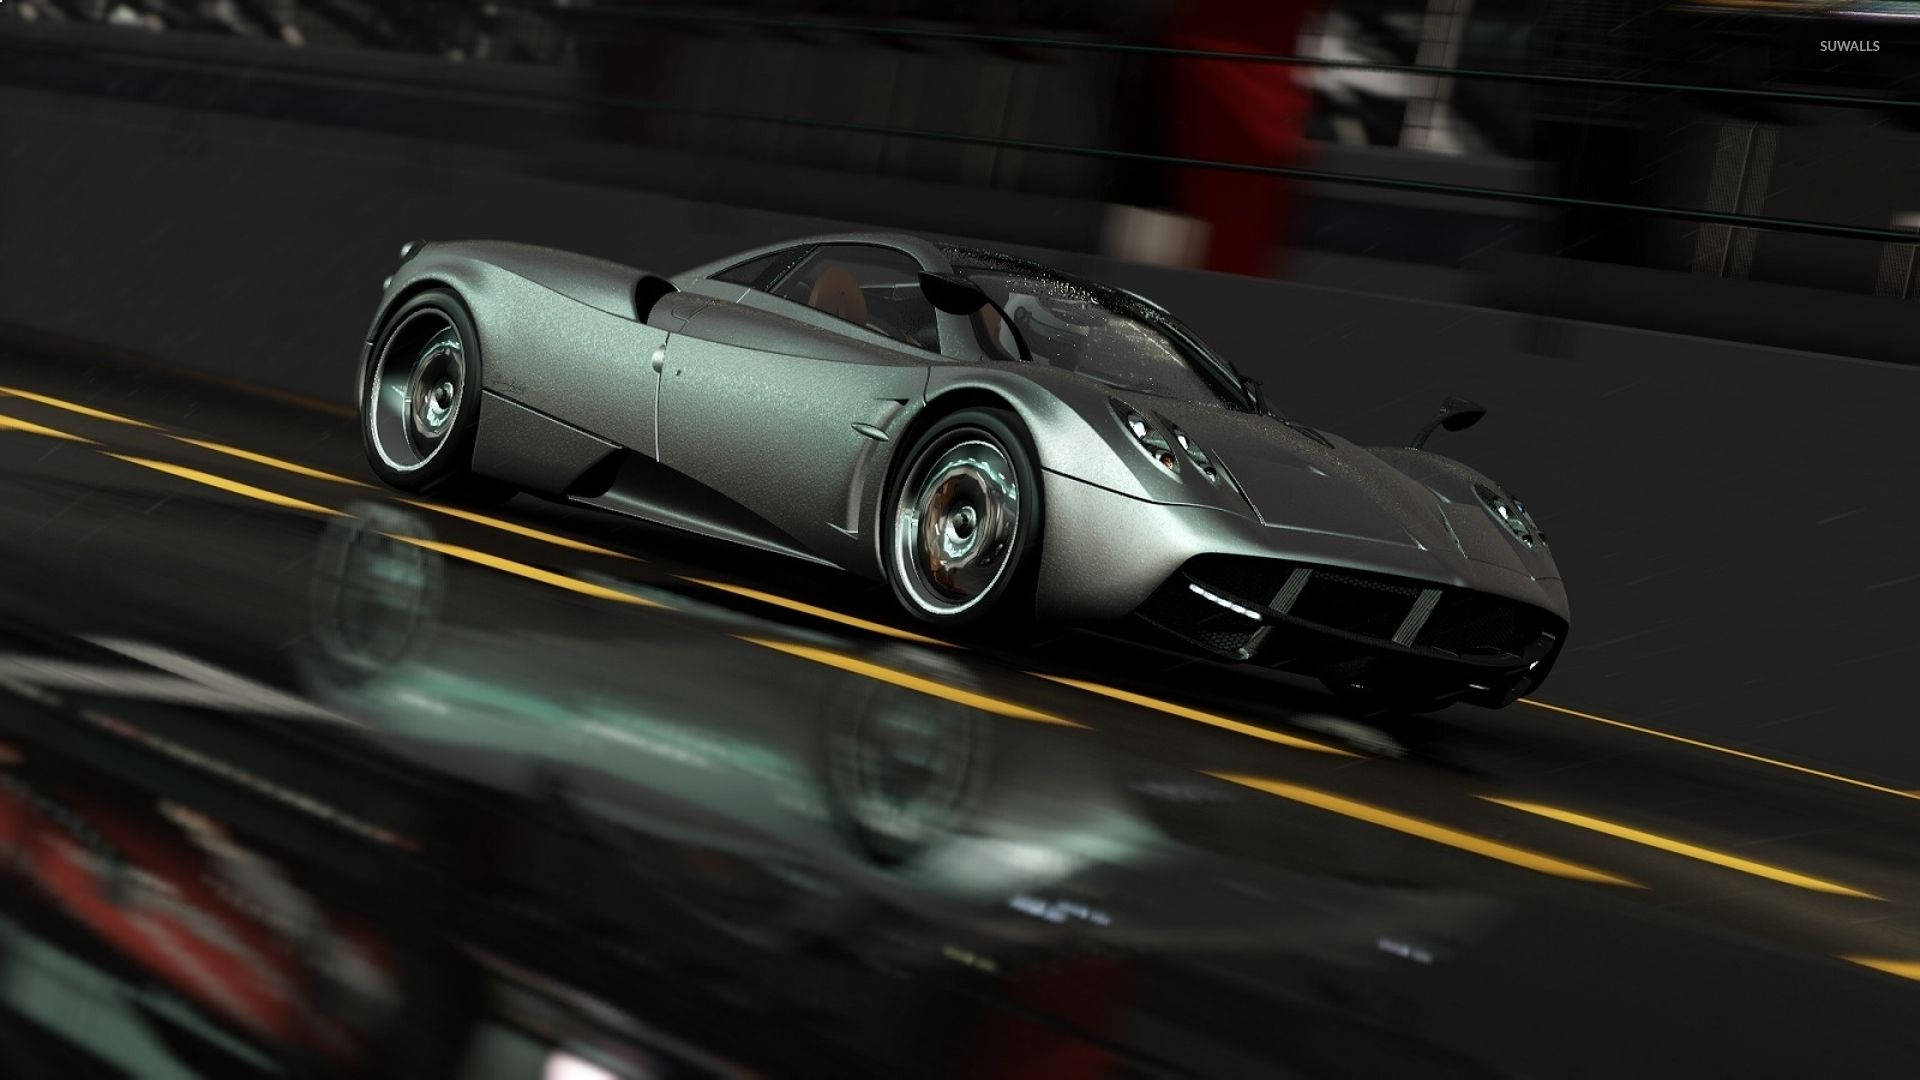 The thrill of speed in Project Cars 2 with Pagani Huayra. Wallpaper